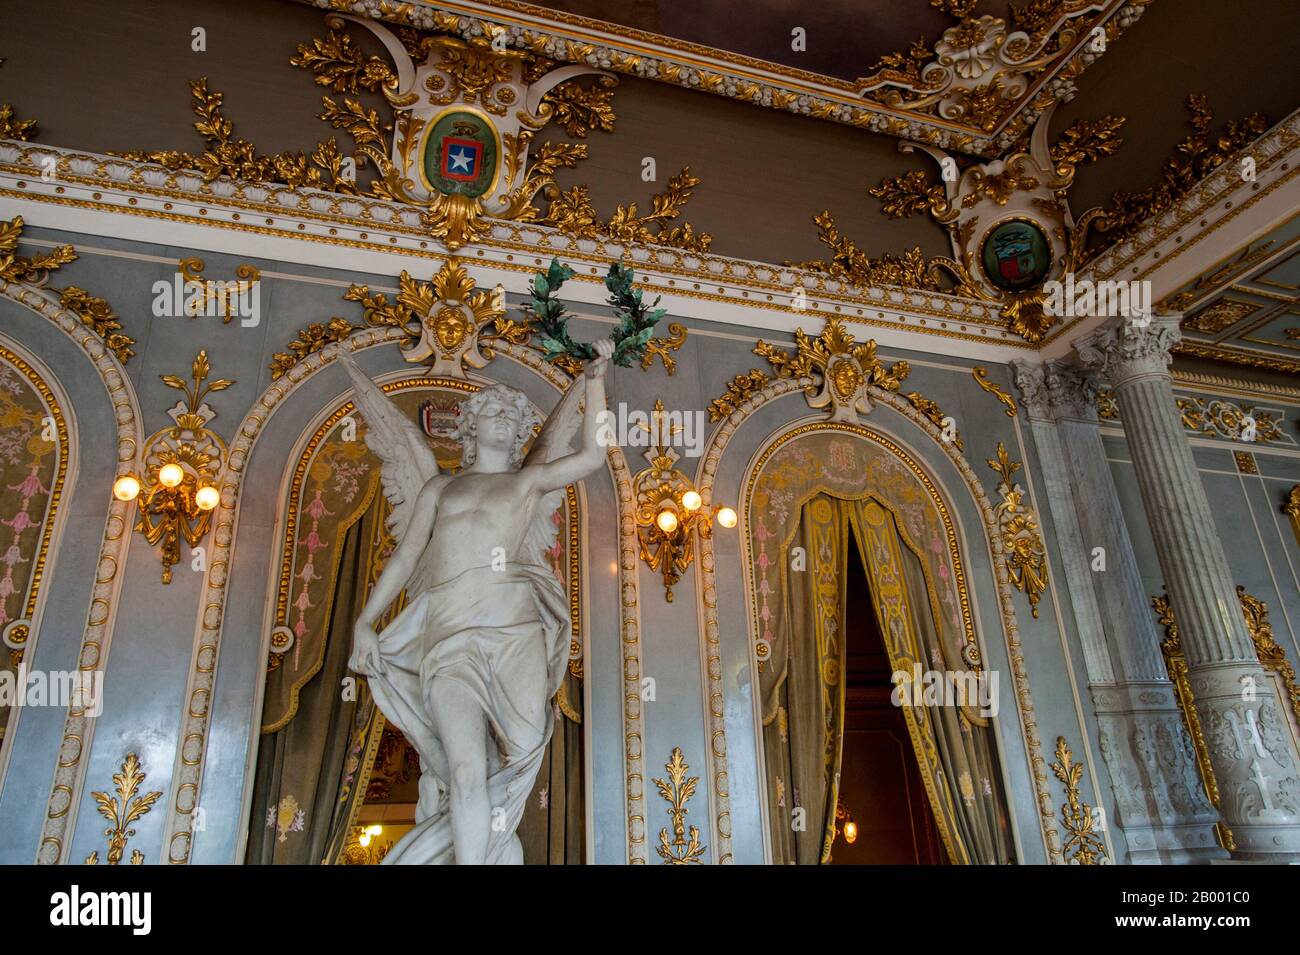 A statue in the interior of the National Theatre in San Jose, the capital city of Costa Rica. Stock Photo